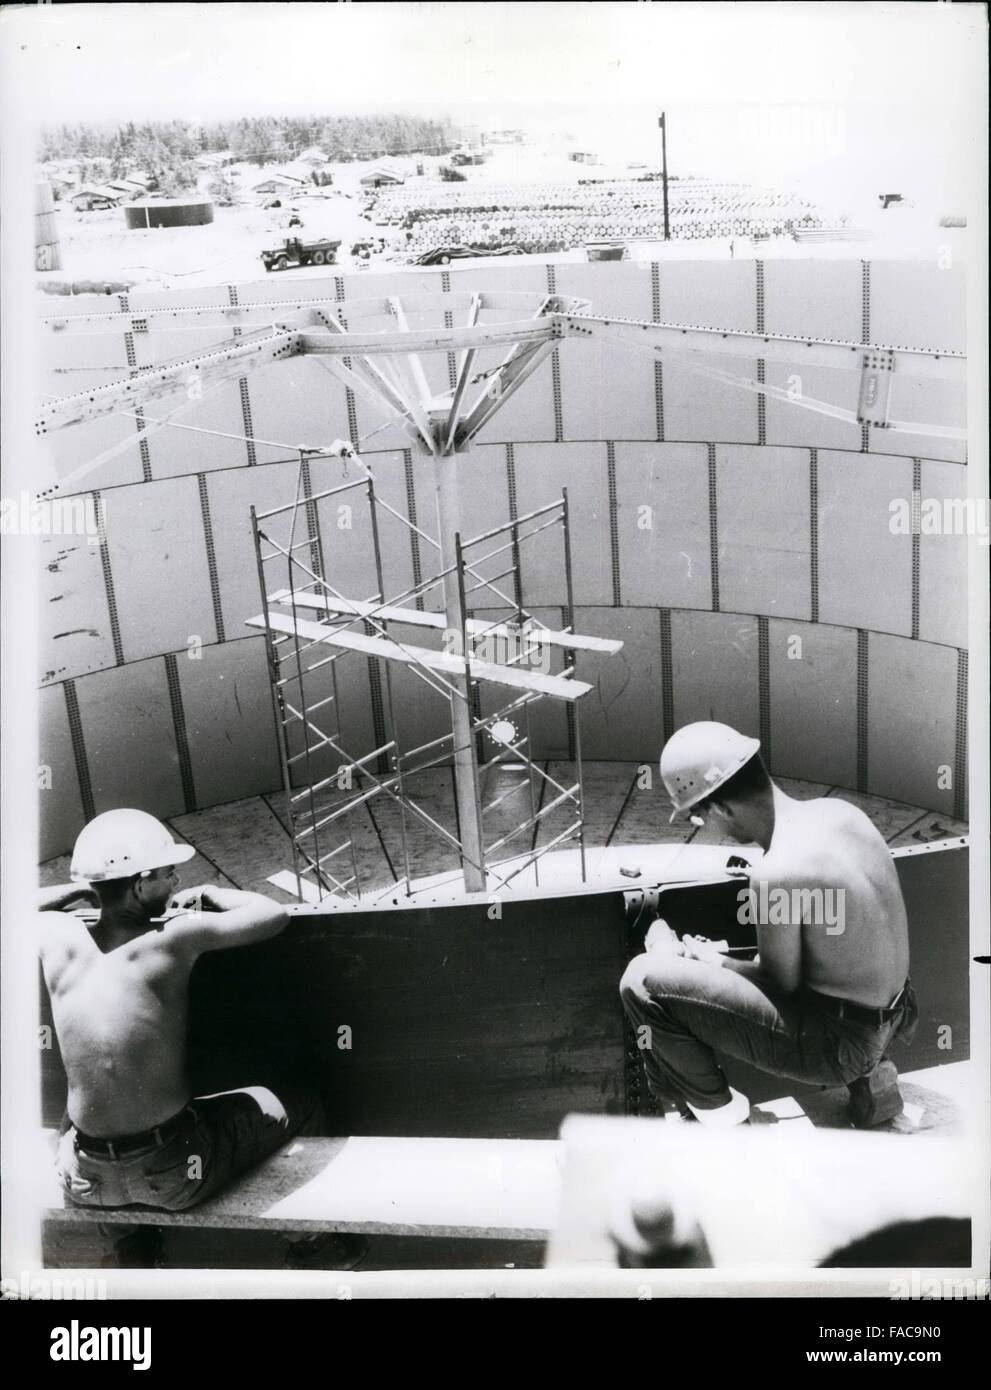 1968 - Over The Top - Navy Seabee steel workers of Naval Mobile Construction Battalion Seventy One tighten the last few bolts on the top of one of the five aviation jet fuel storage tanks being built at Chu Lai, South Vietnam. The mast rising put of the center of the circular tank will support the tank's lid. © Keystone Pictures USA/ZUMAPRESS.com/Alamy Live News Stock Photo